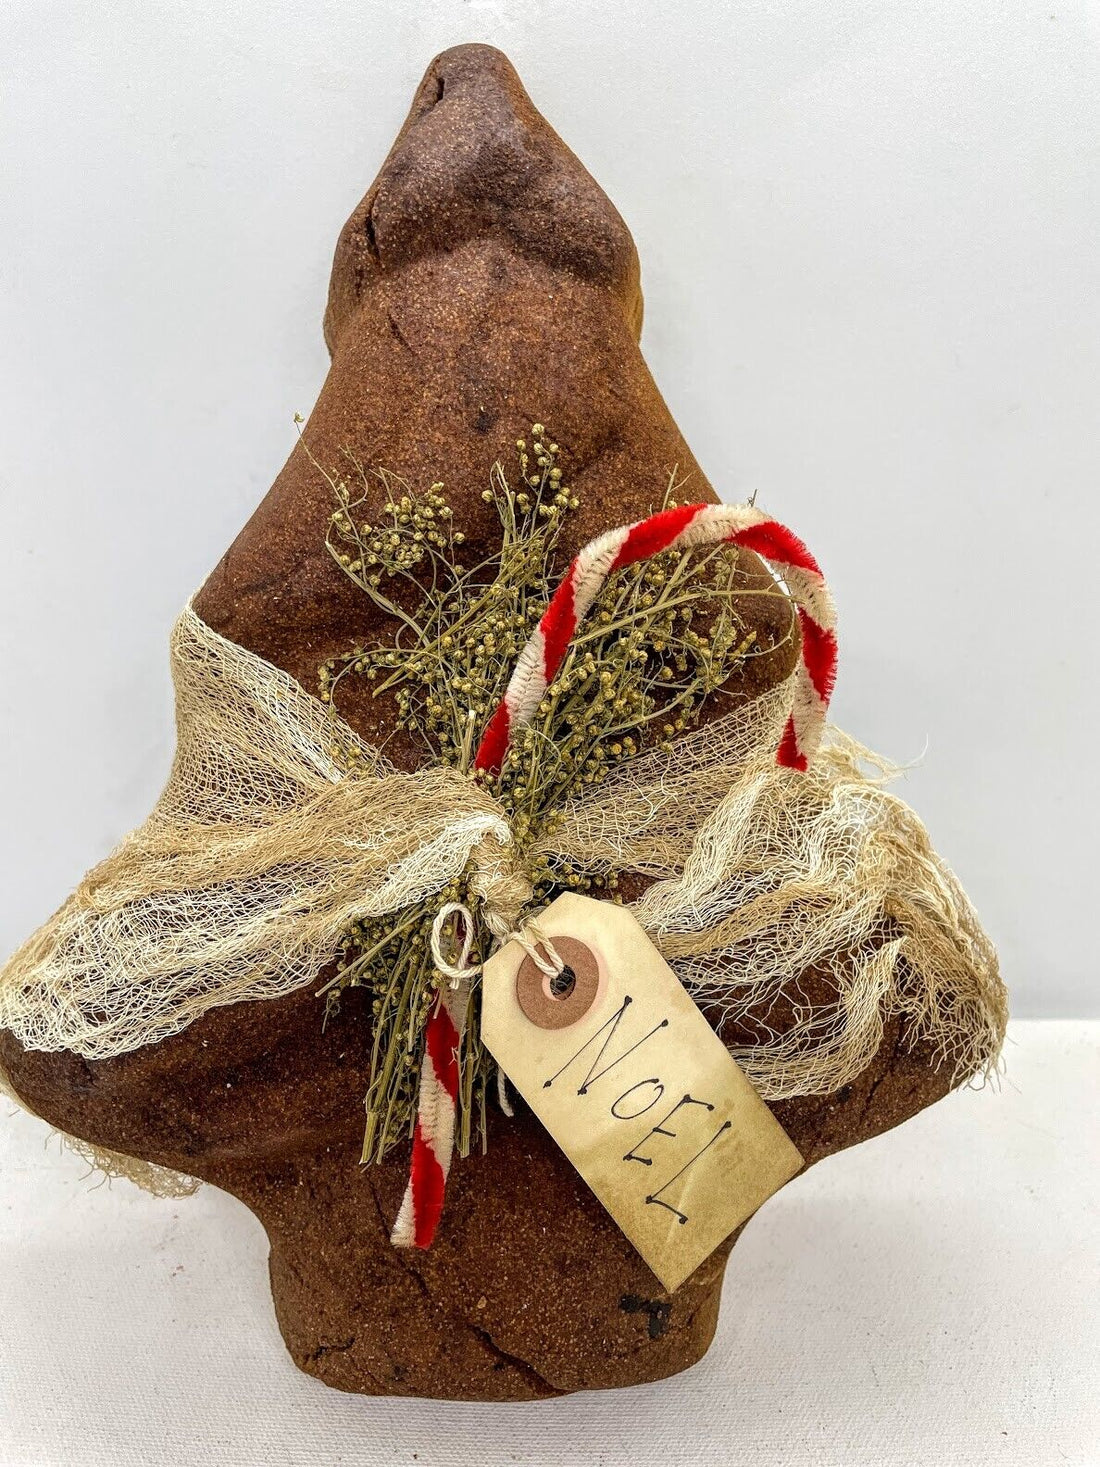 Primitive Christmas Tree Shaped Pantry Cake Cheesecloth choice of Scent - The Primitive Pineapple Collection